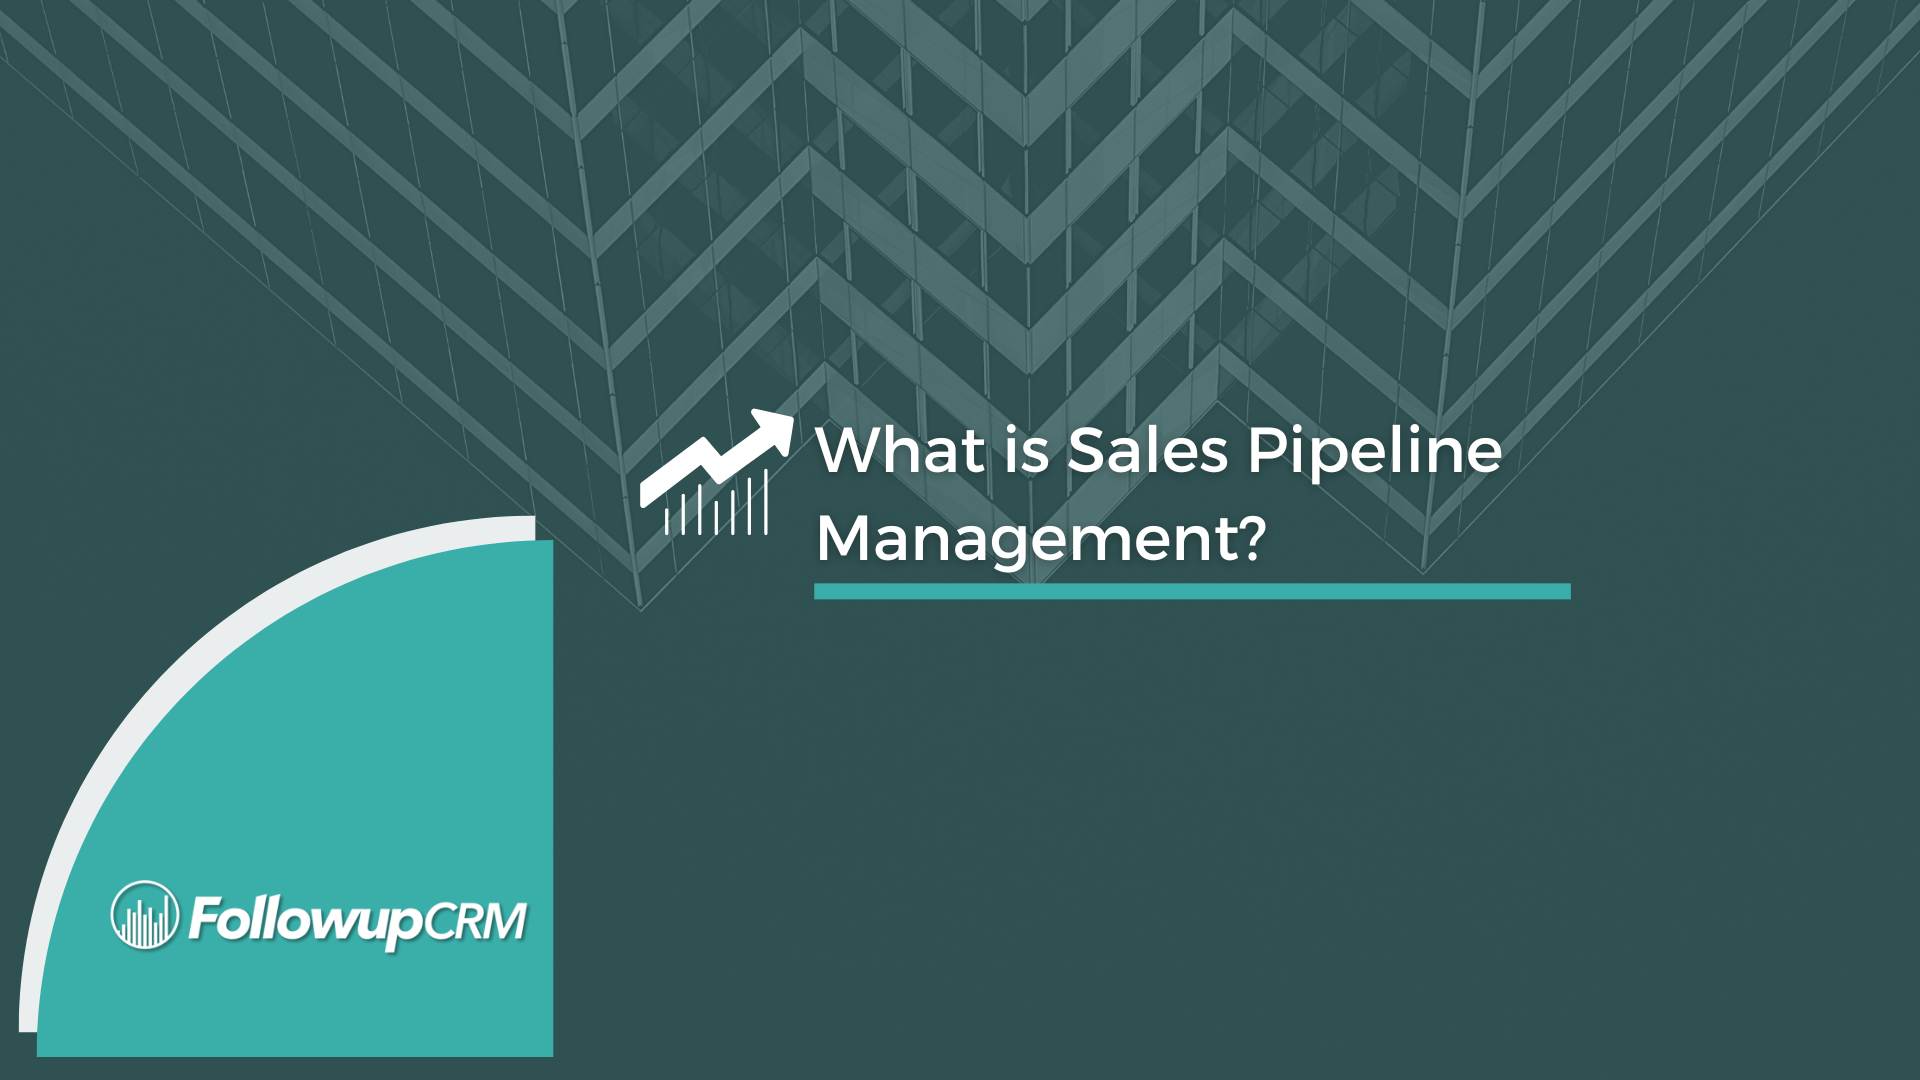 What is Sales Pipeline Management?